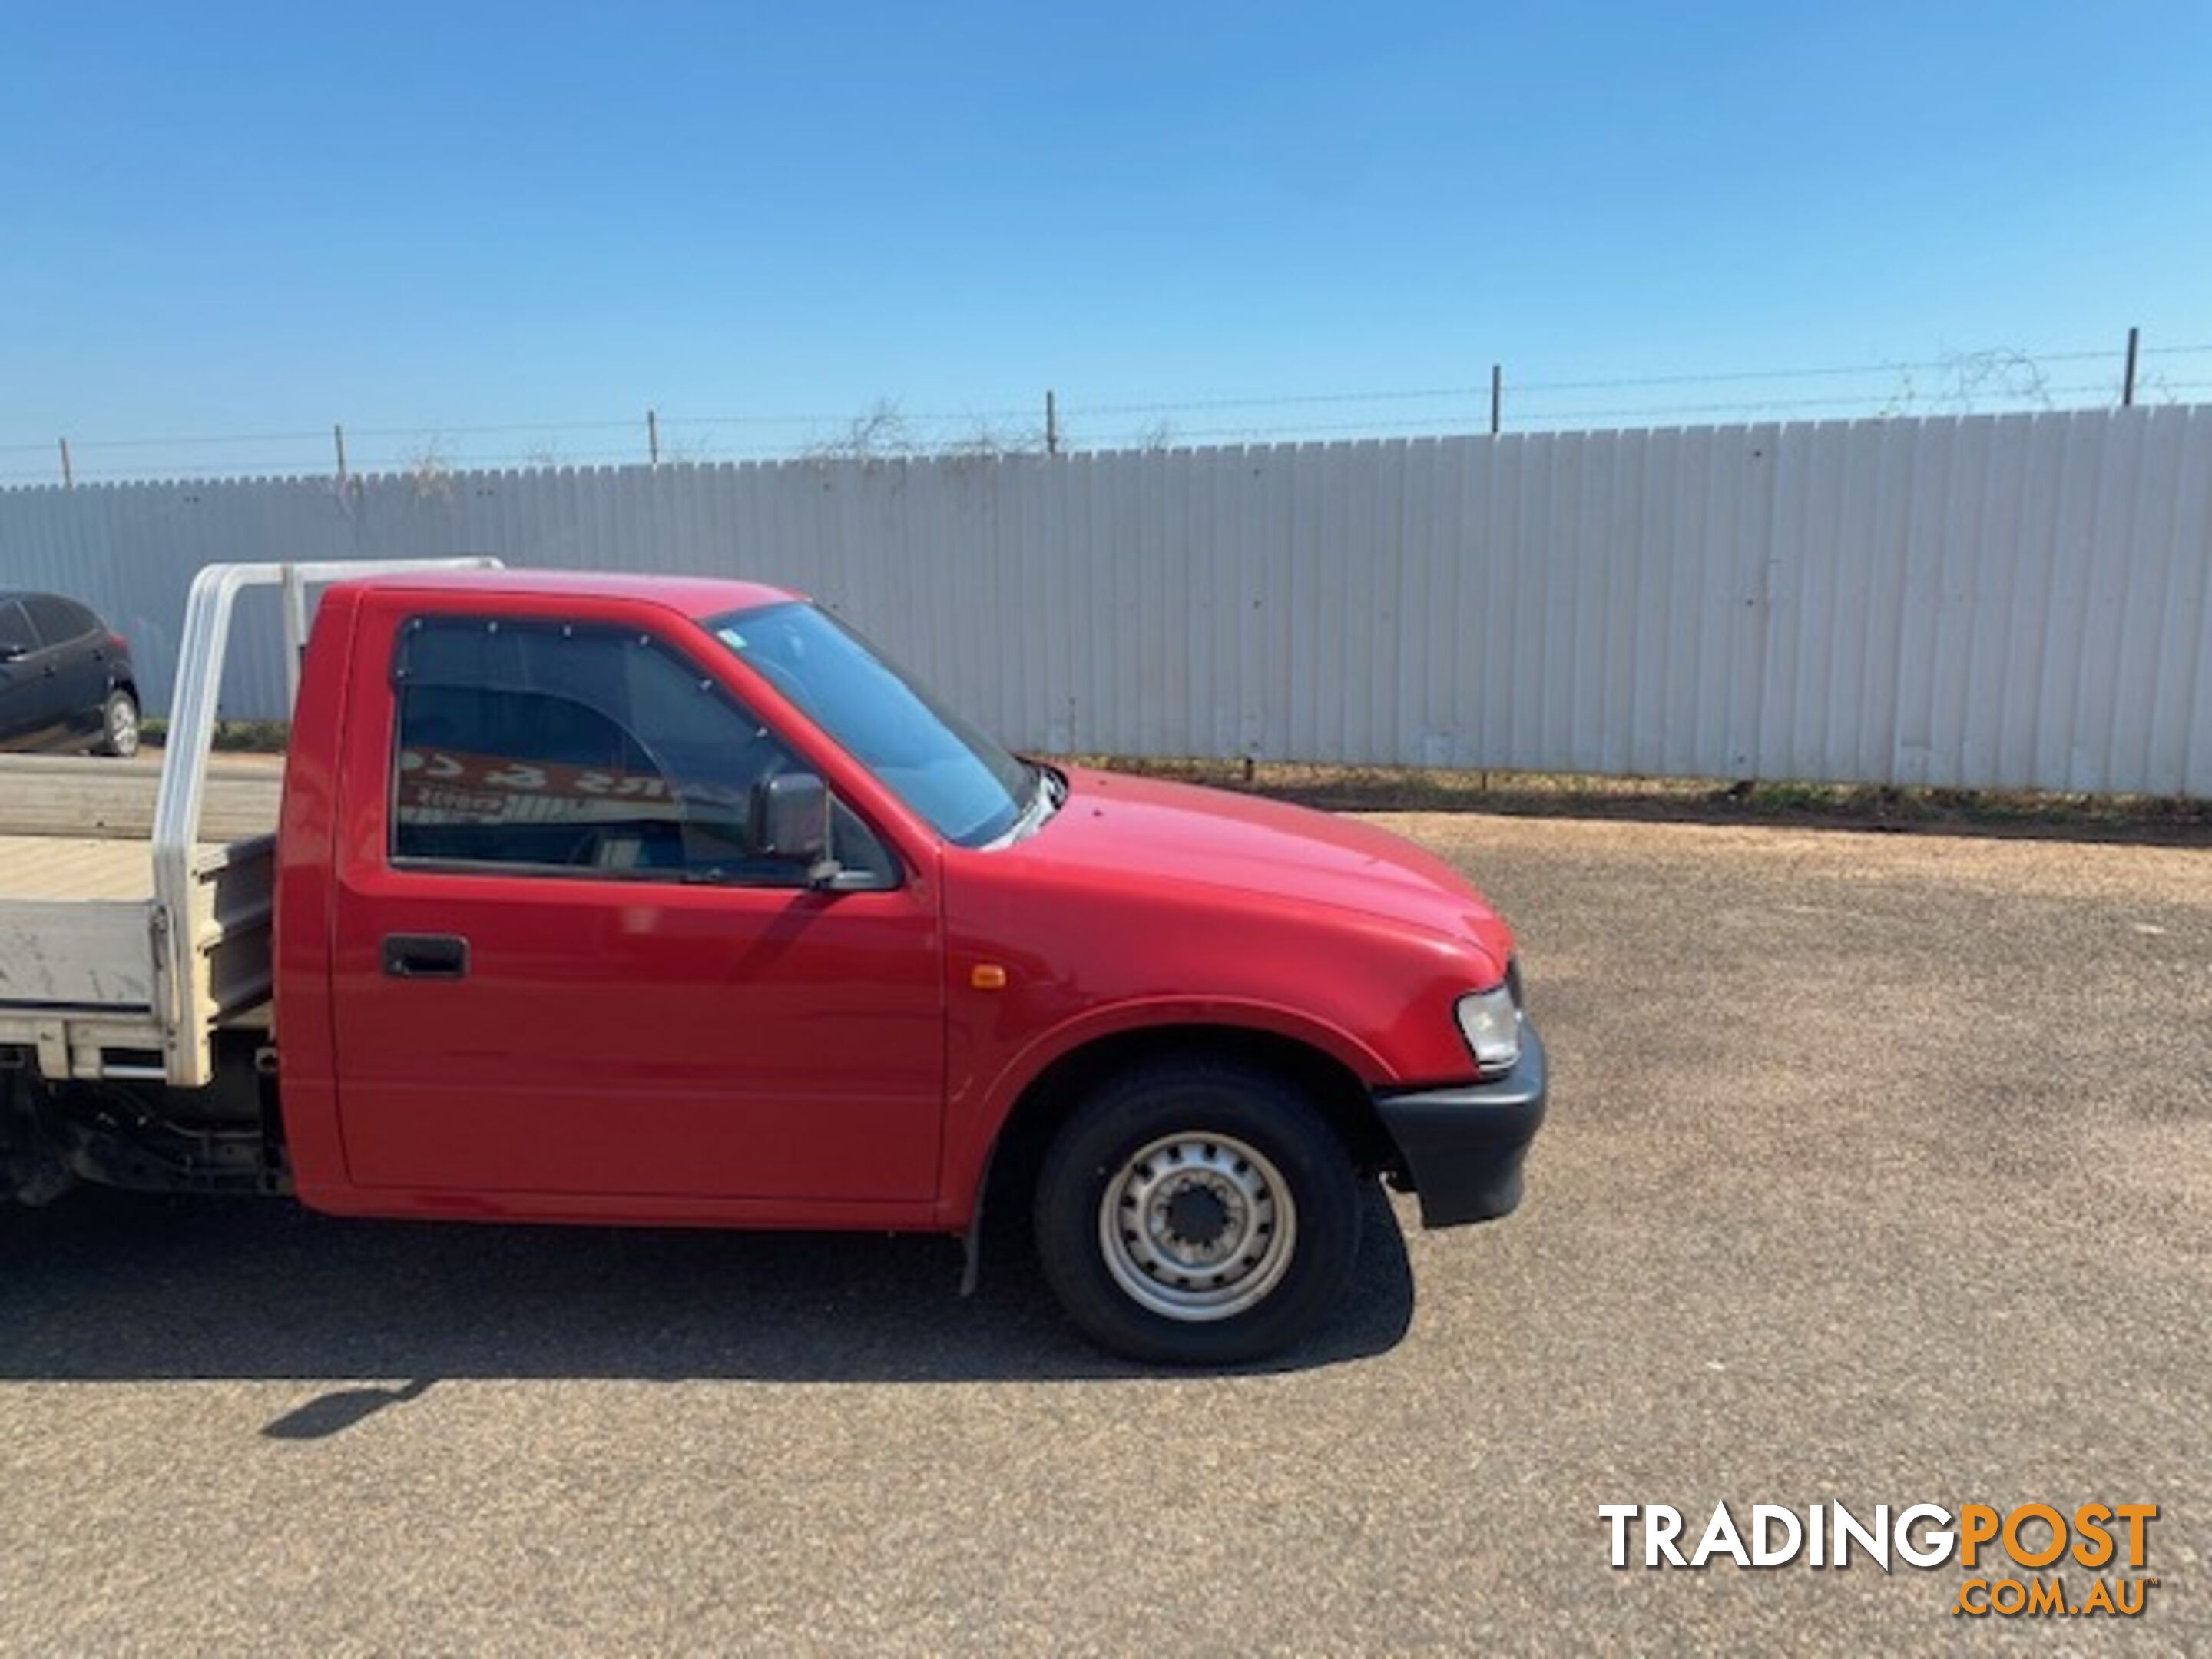 1997 Holden Rodeo Ute Manual